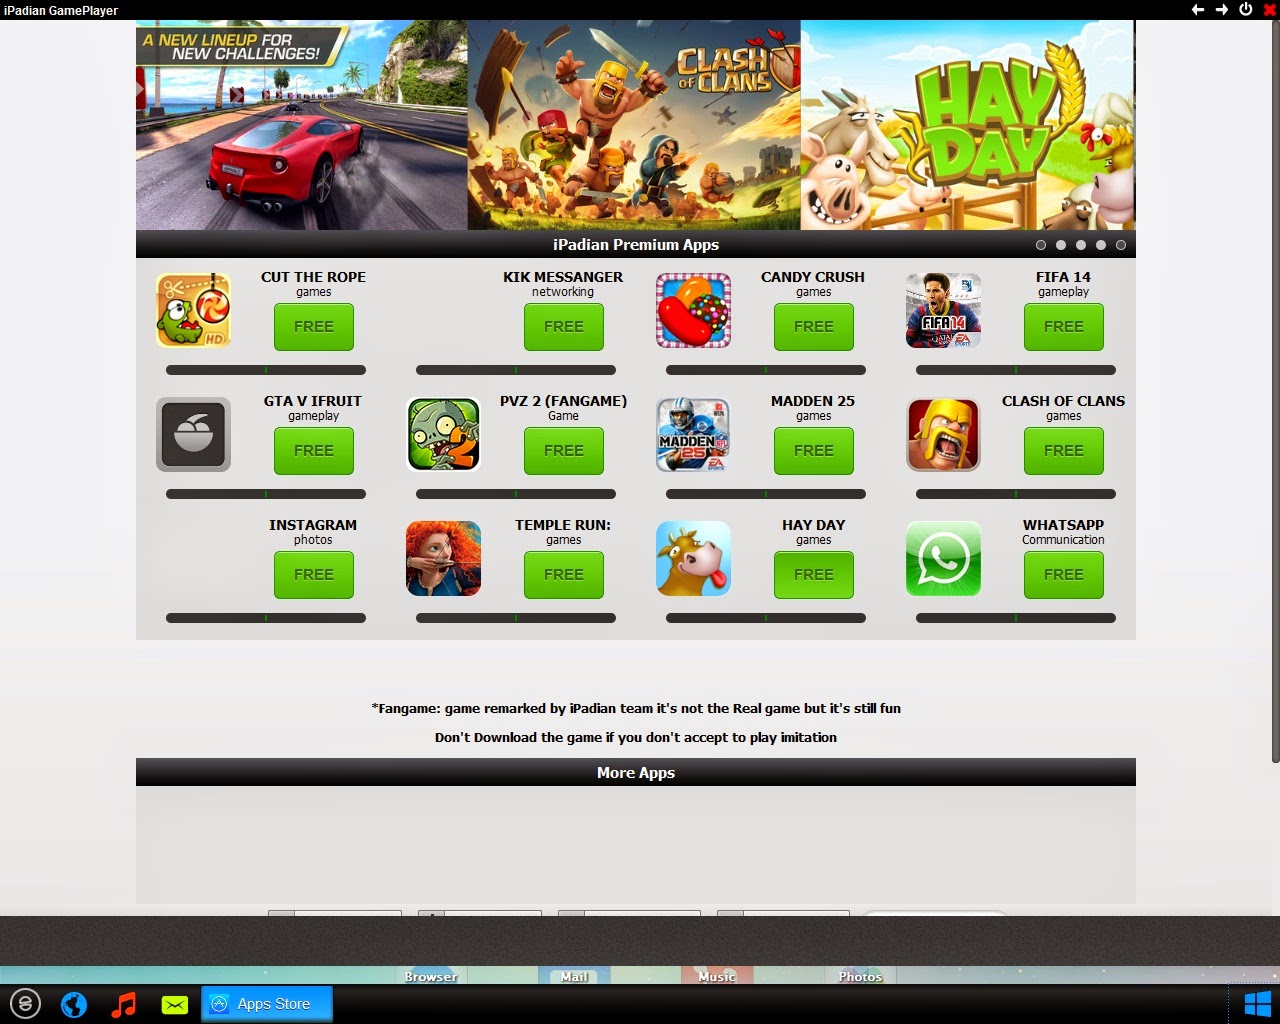 How to Play Hay Day for PC/Laptop without Bluestacks